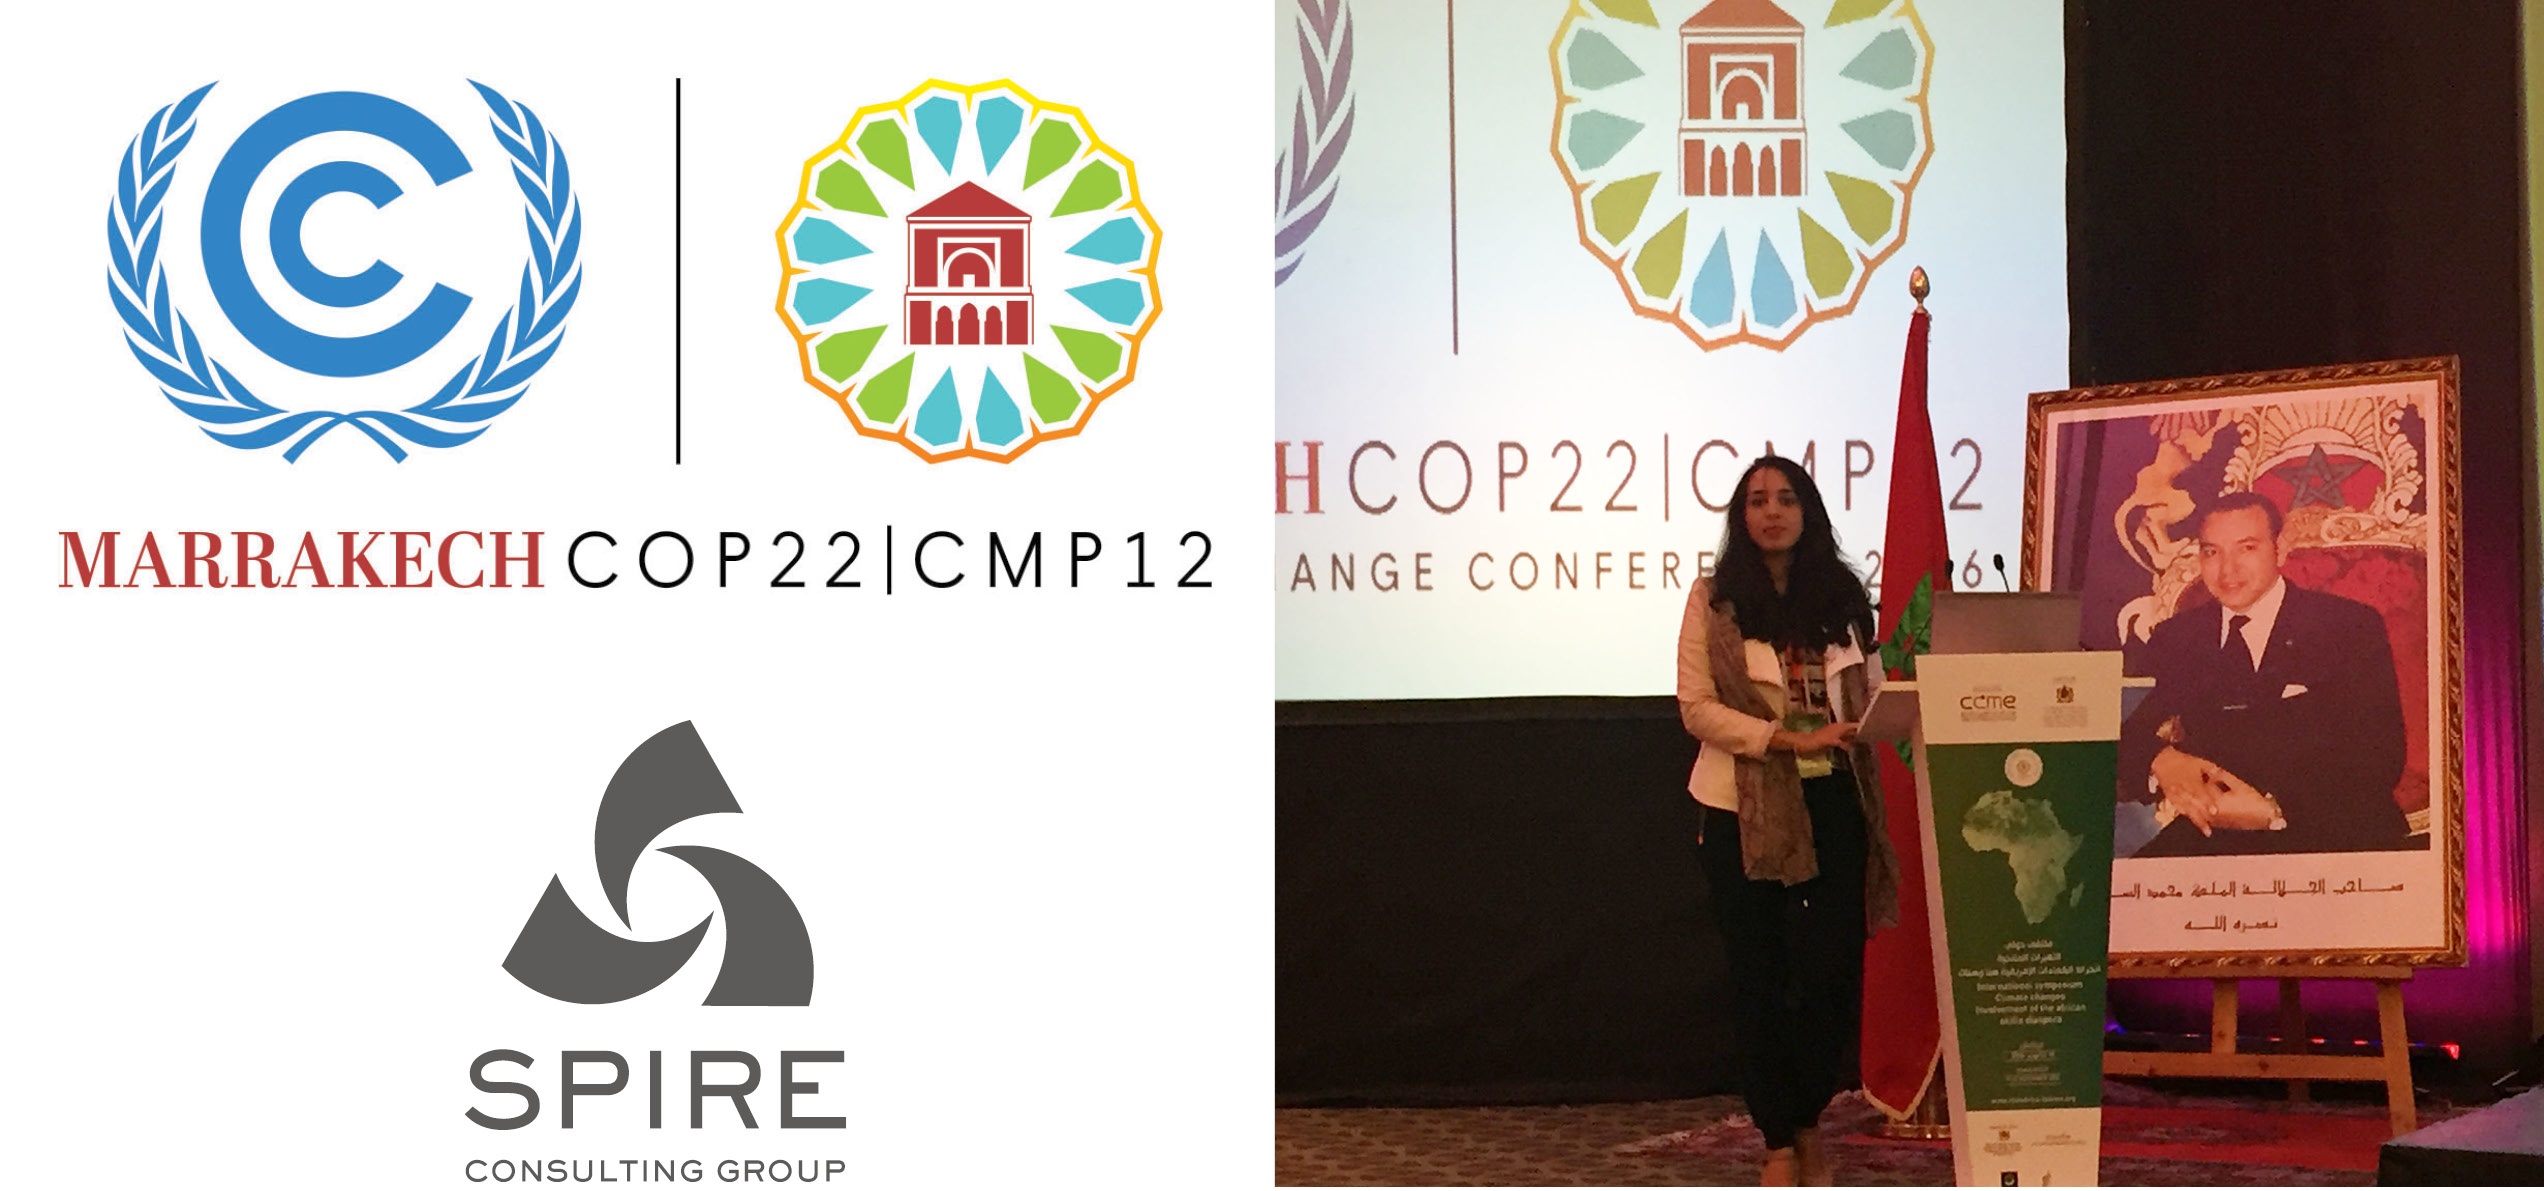 Spire Consulting Group speaks at UN climate change conference